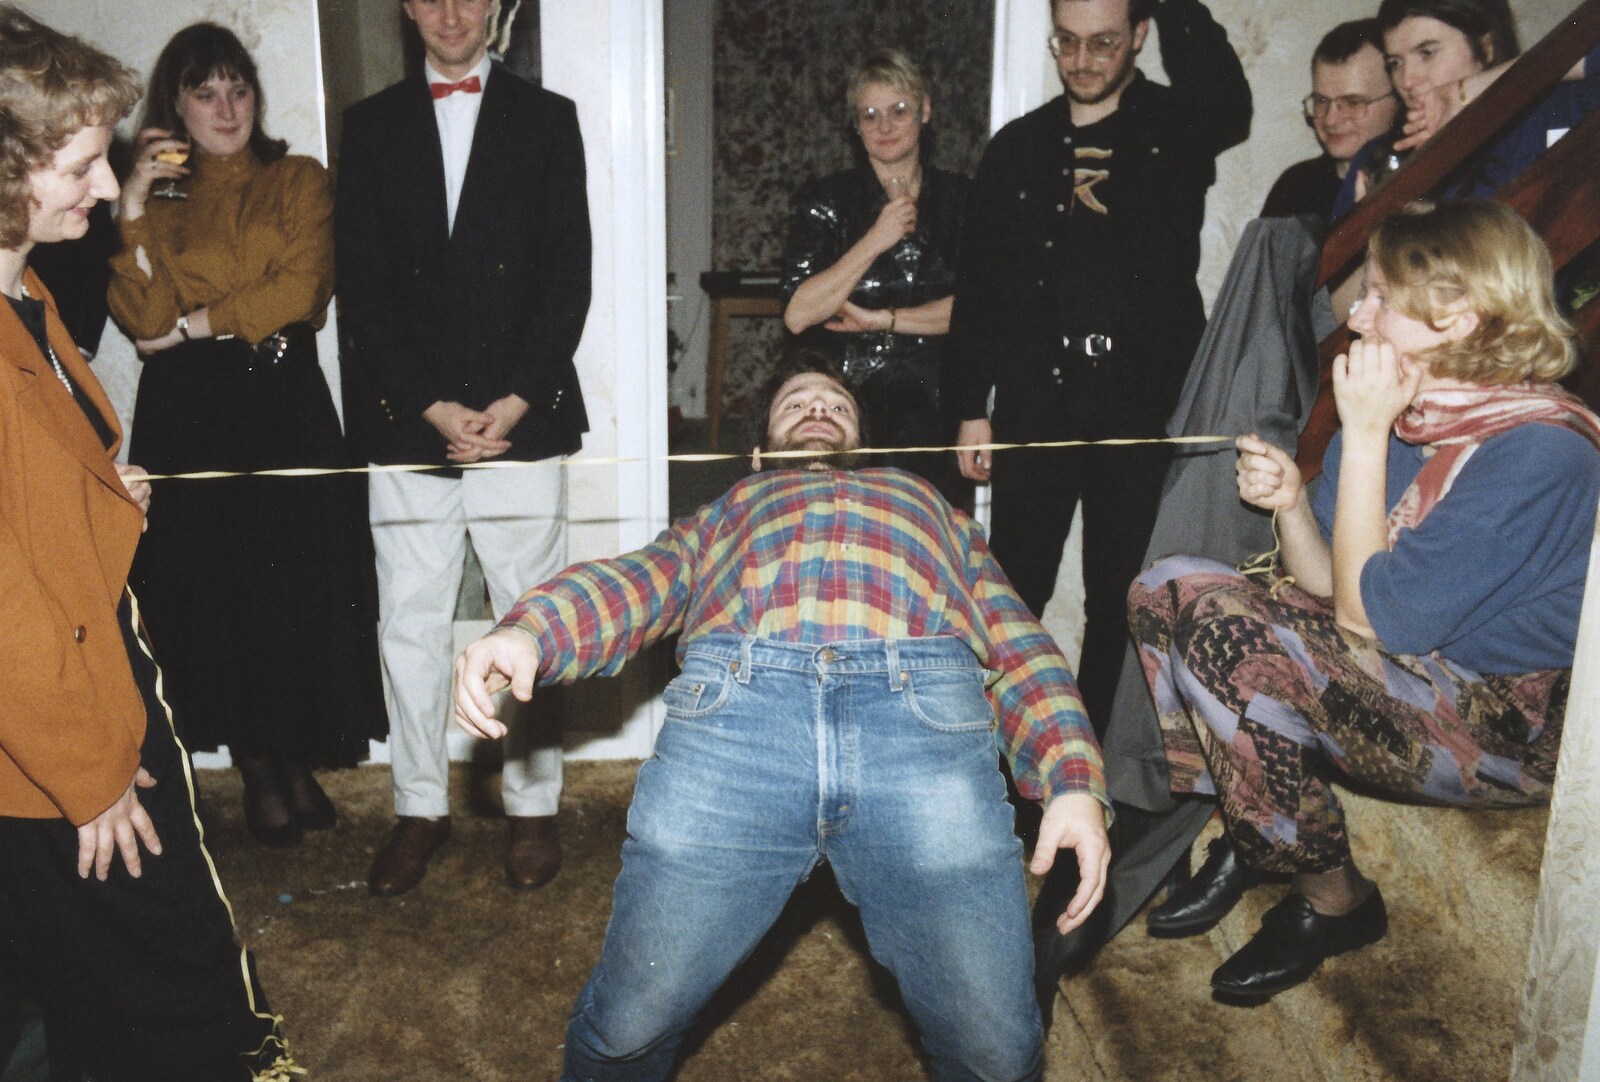 Another limbo moment from New Year's Eve at Phil's, Hordle, Hampshire - 31st December 1990